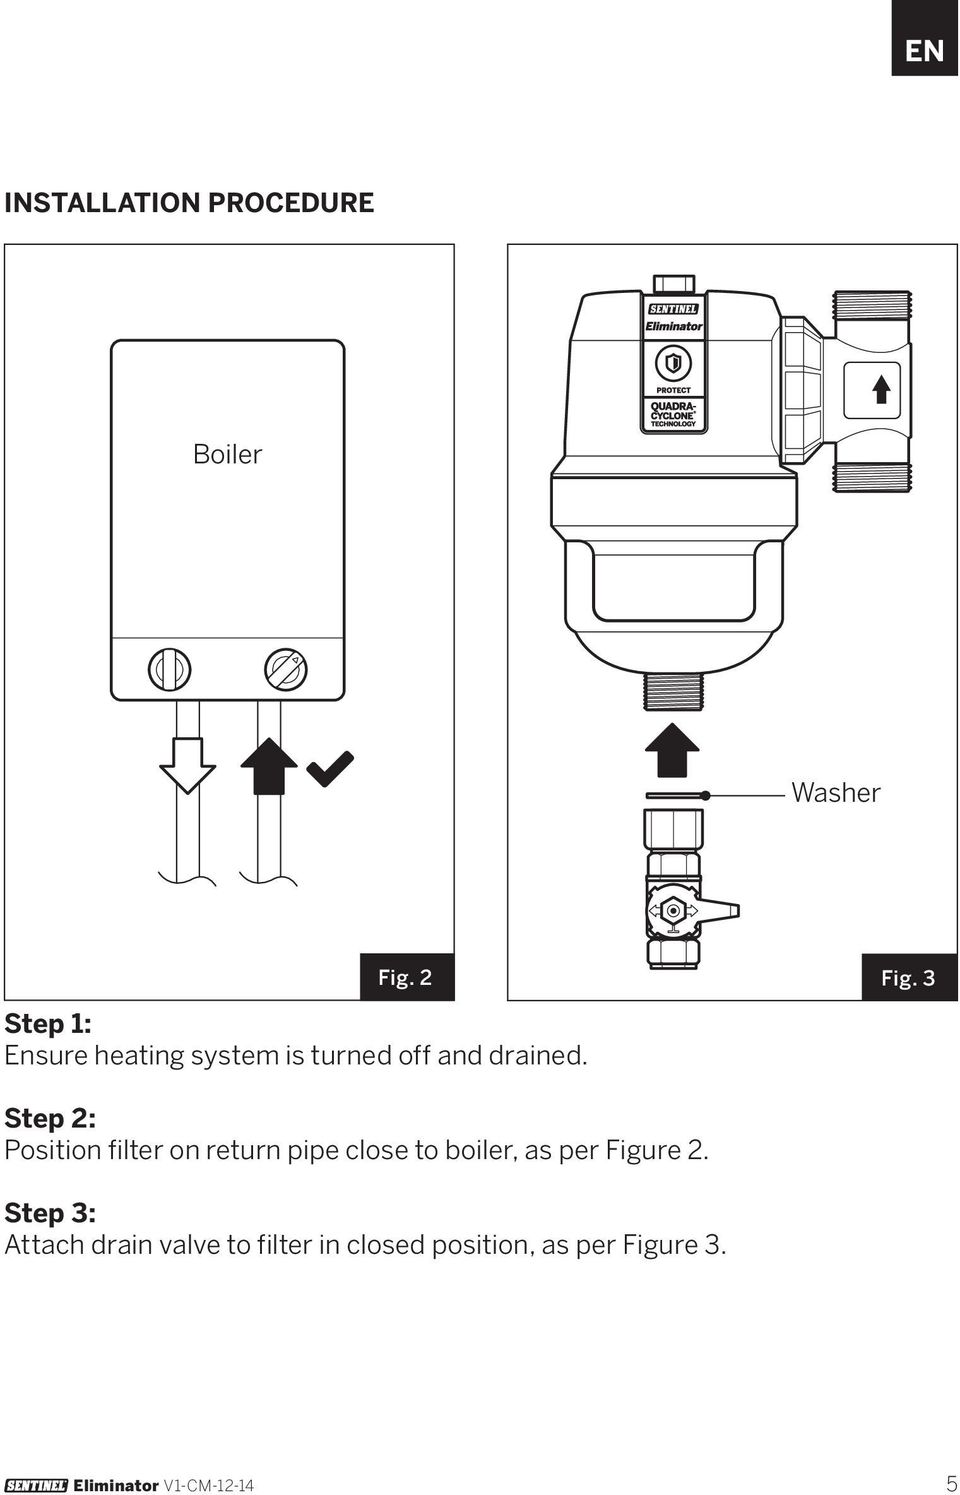 3 Step 2: Position filter on return pipe close to boiler, as per